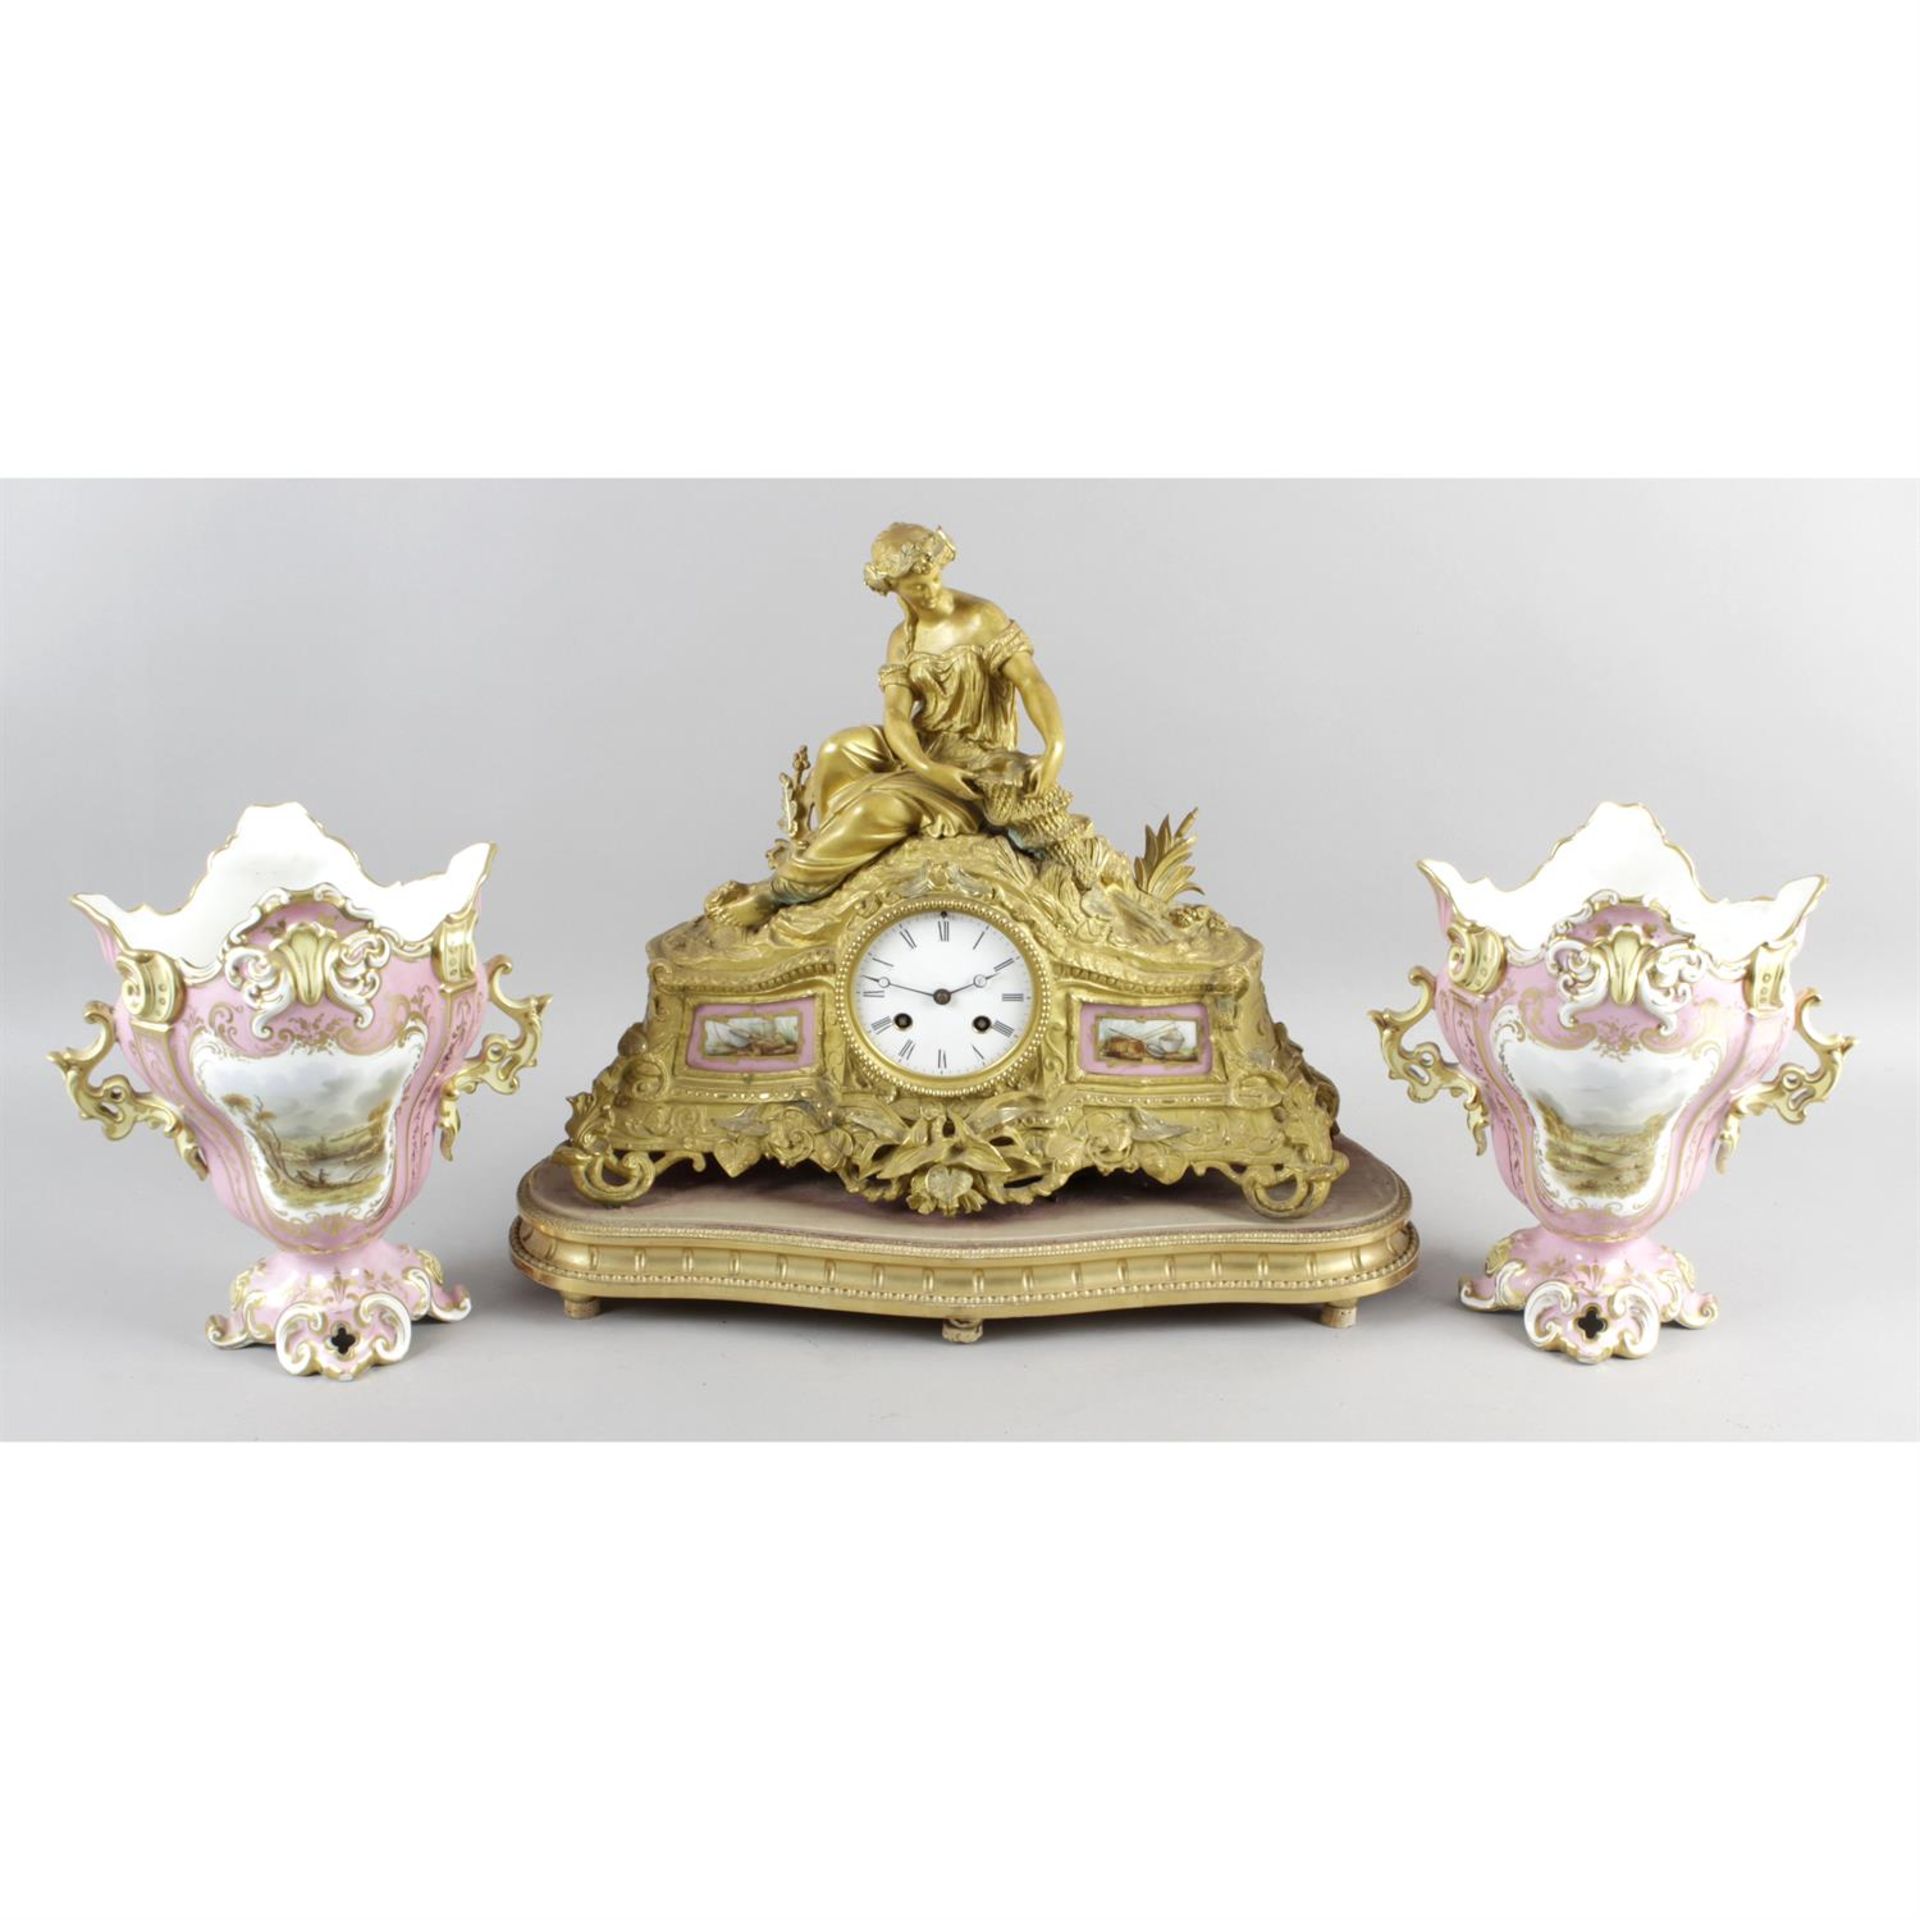 A late 19th century gilt bronze cased mantle clock, together with two porcelain vases.